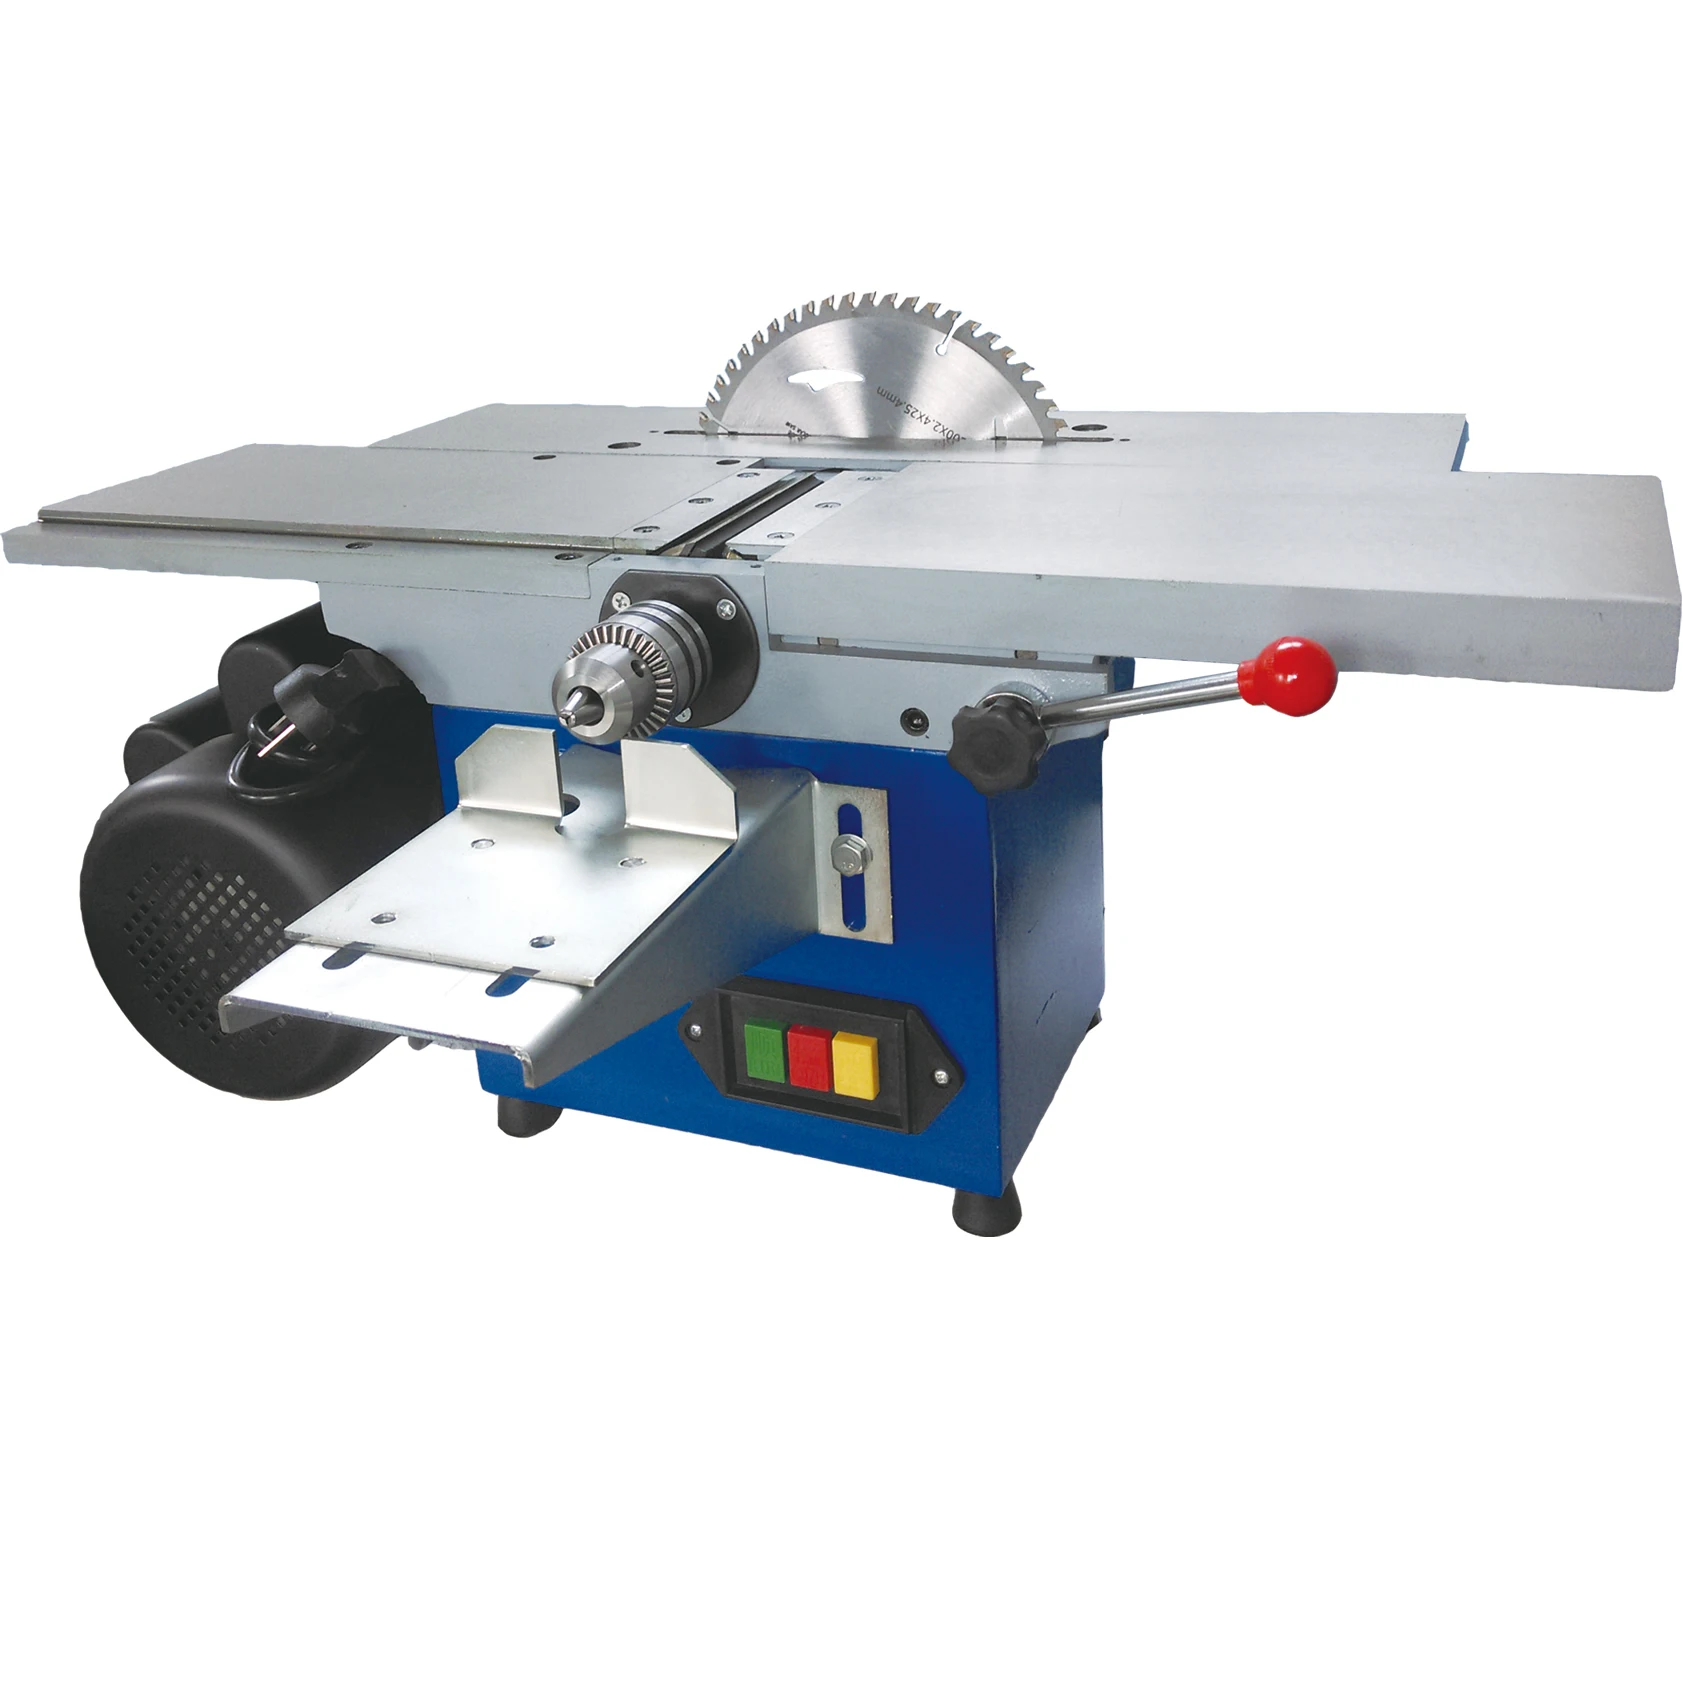 Portable Mini Wood Planer Machine With Mortise Jointer Planer Combination Wood Table Saw Mb120 Foe Sale Buy Wood Planer Jointer Planer Combination Mini Wood Planer Machine Product On Alibaba Com